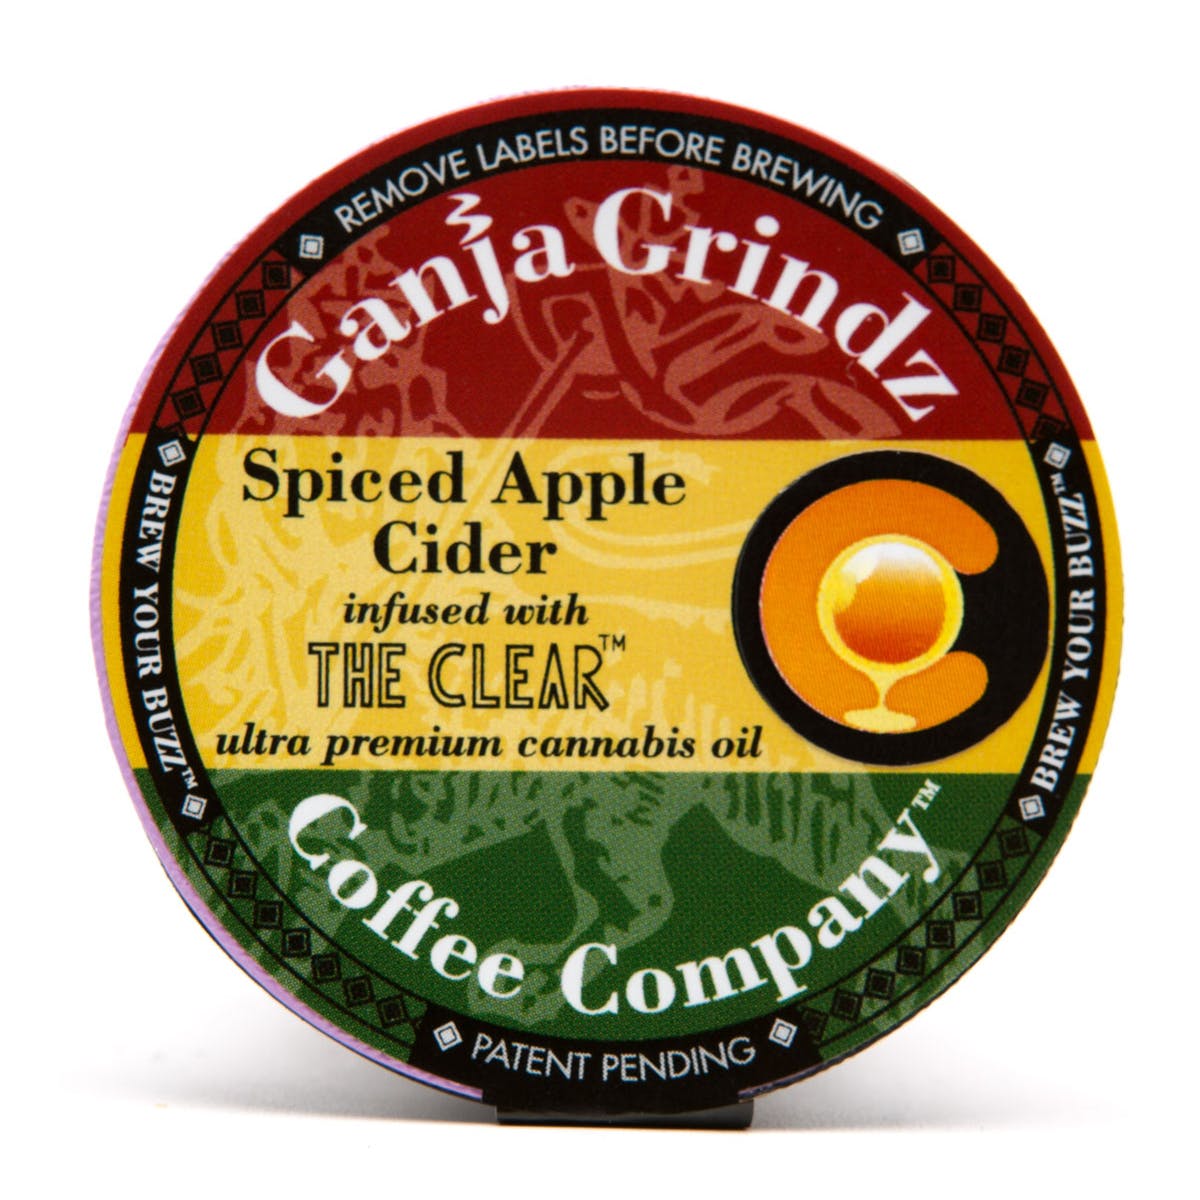 edible-spiced-apple-cider-cup-2c-50mg